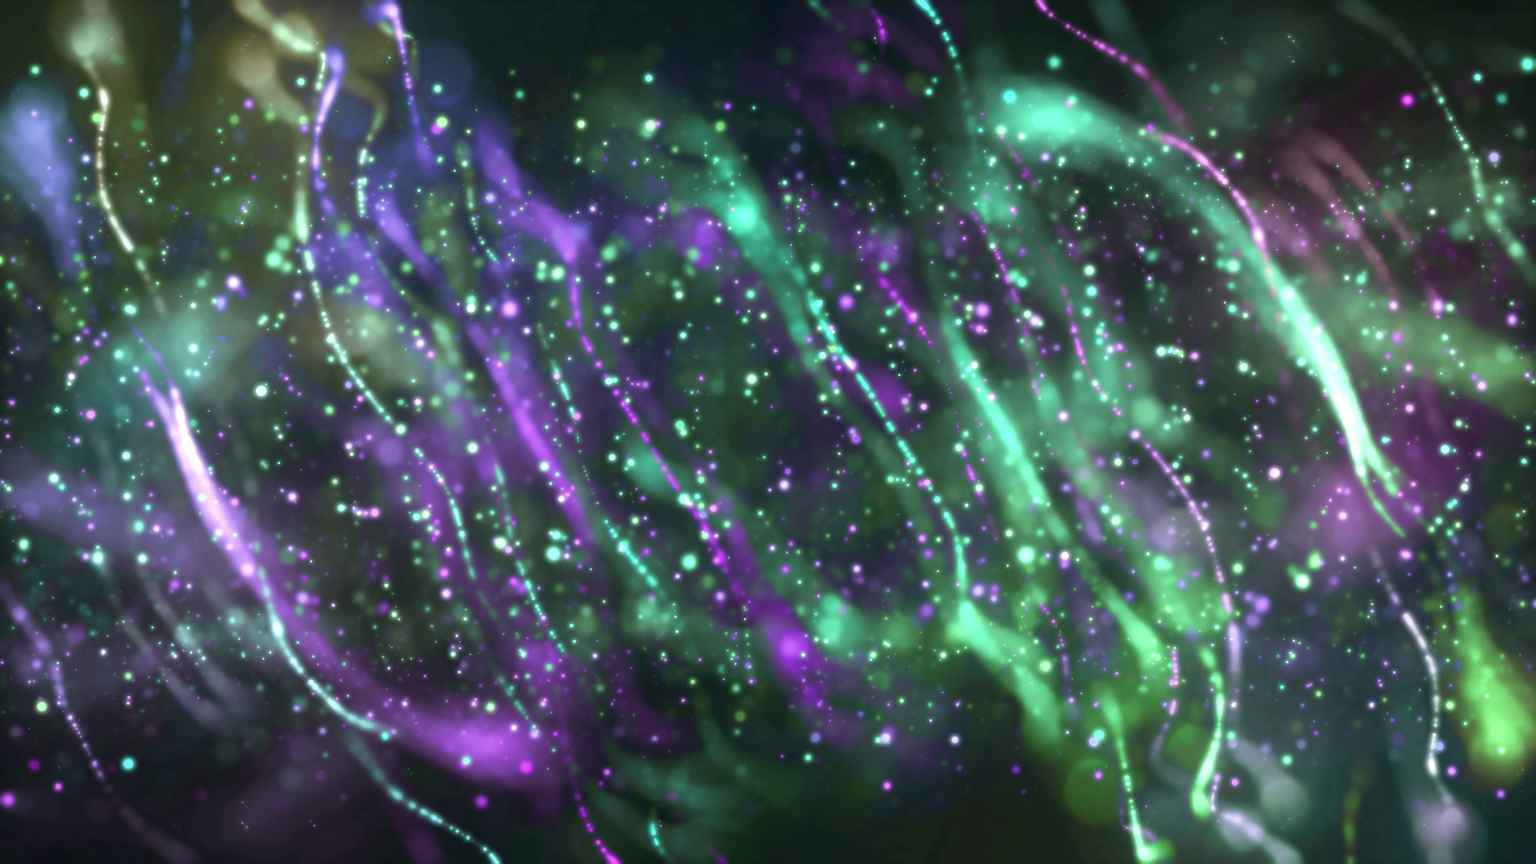 4K Green & Purple Particles Motion Background || Free To Use 4K Screensaver